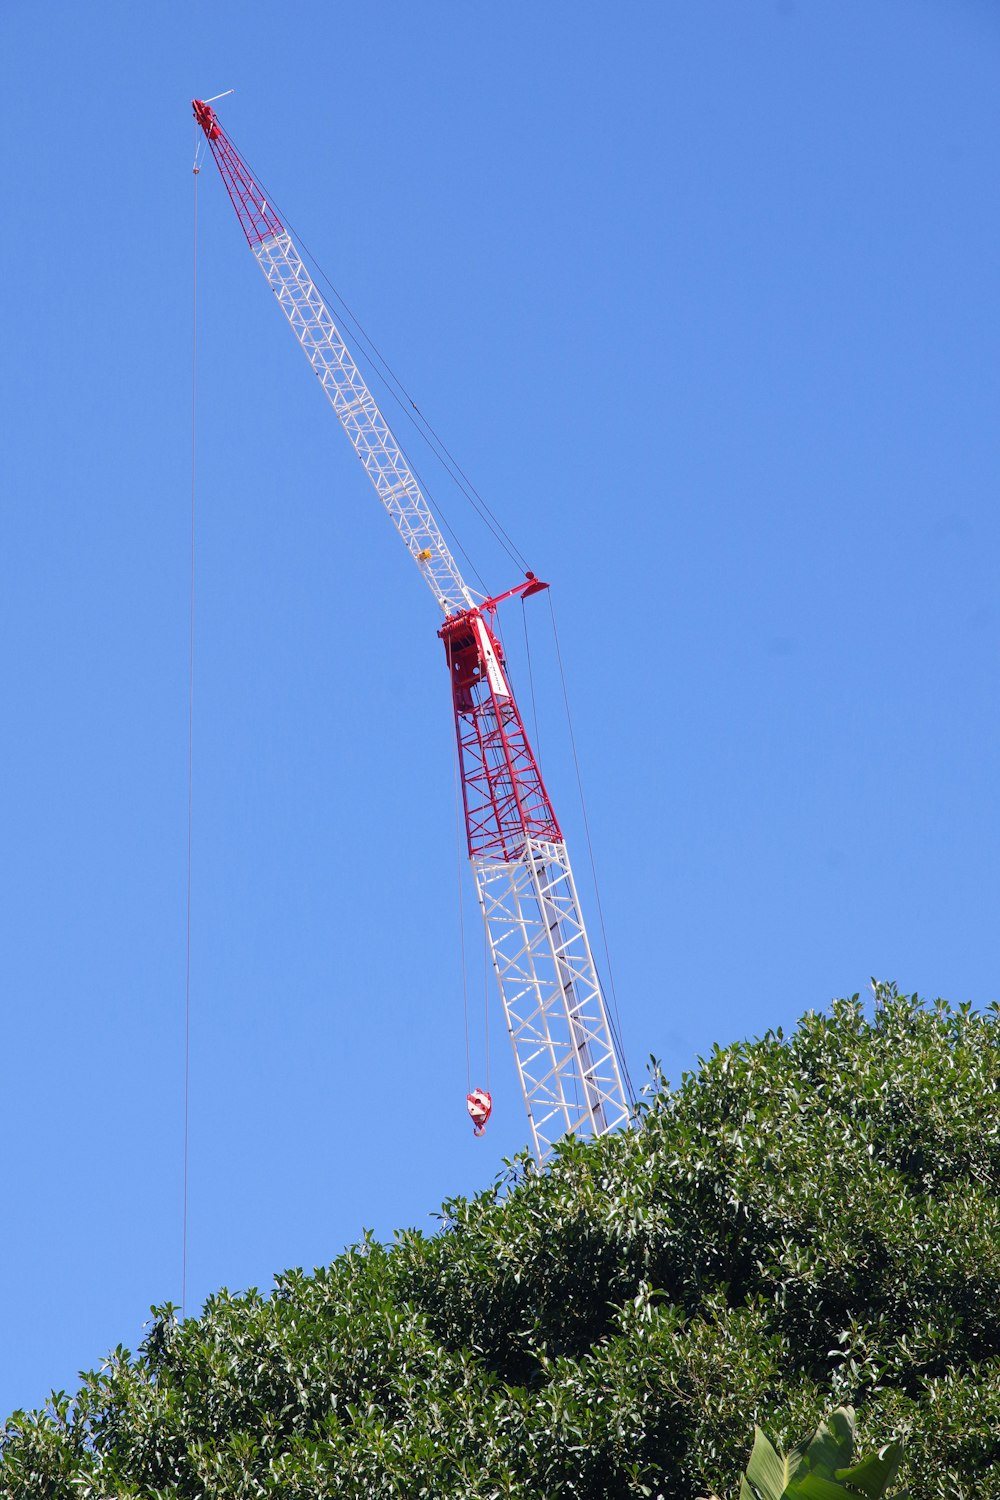 red and gray crane under blue sky during daytime